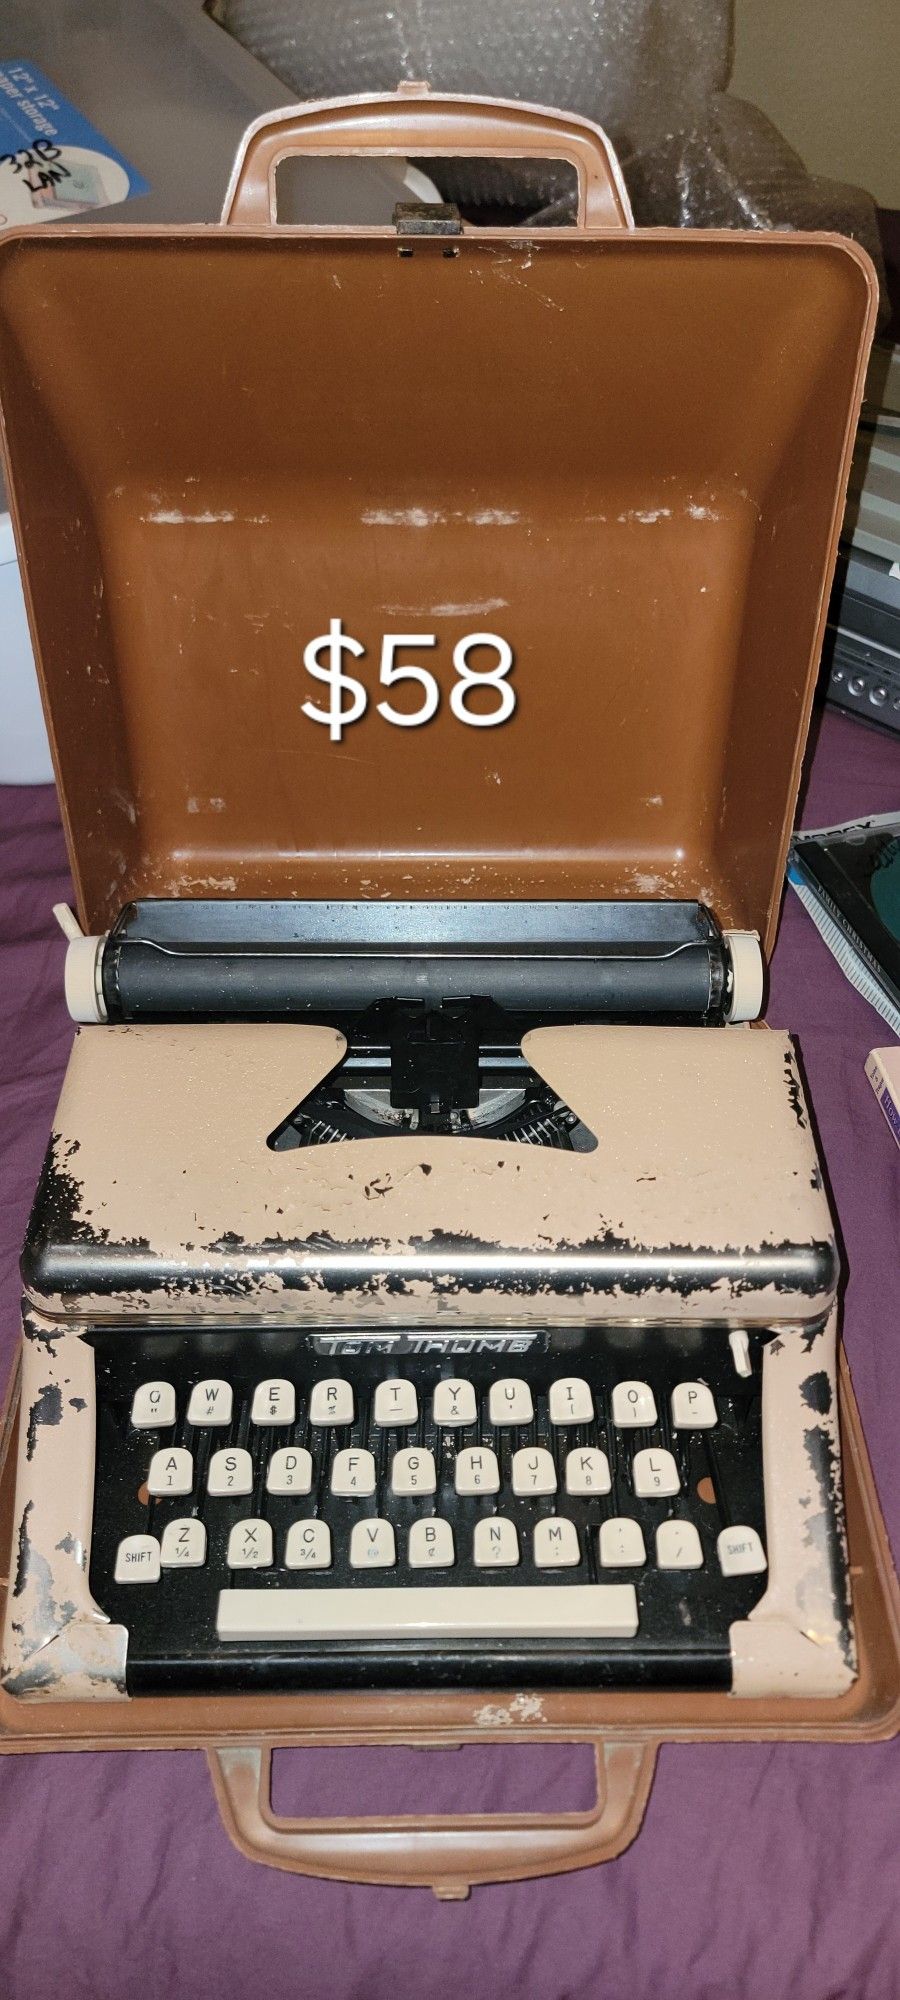 Vintage Tom Thumb Child's Typewriter Metal Toy Portable Nice brown/tan $58

Pick up in Harlingen near Walmart.
Antiques, Telephones & Flags